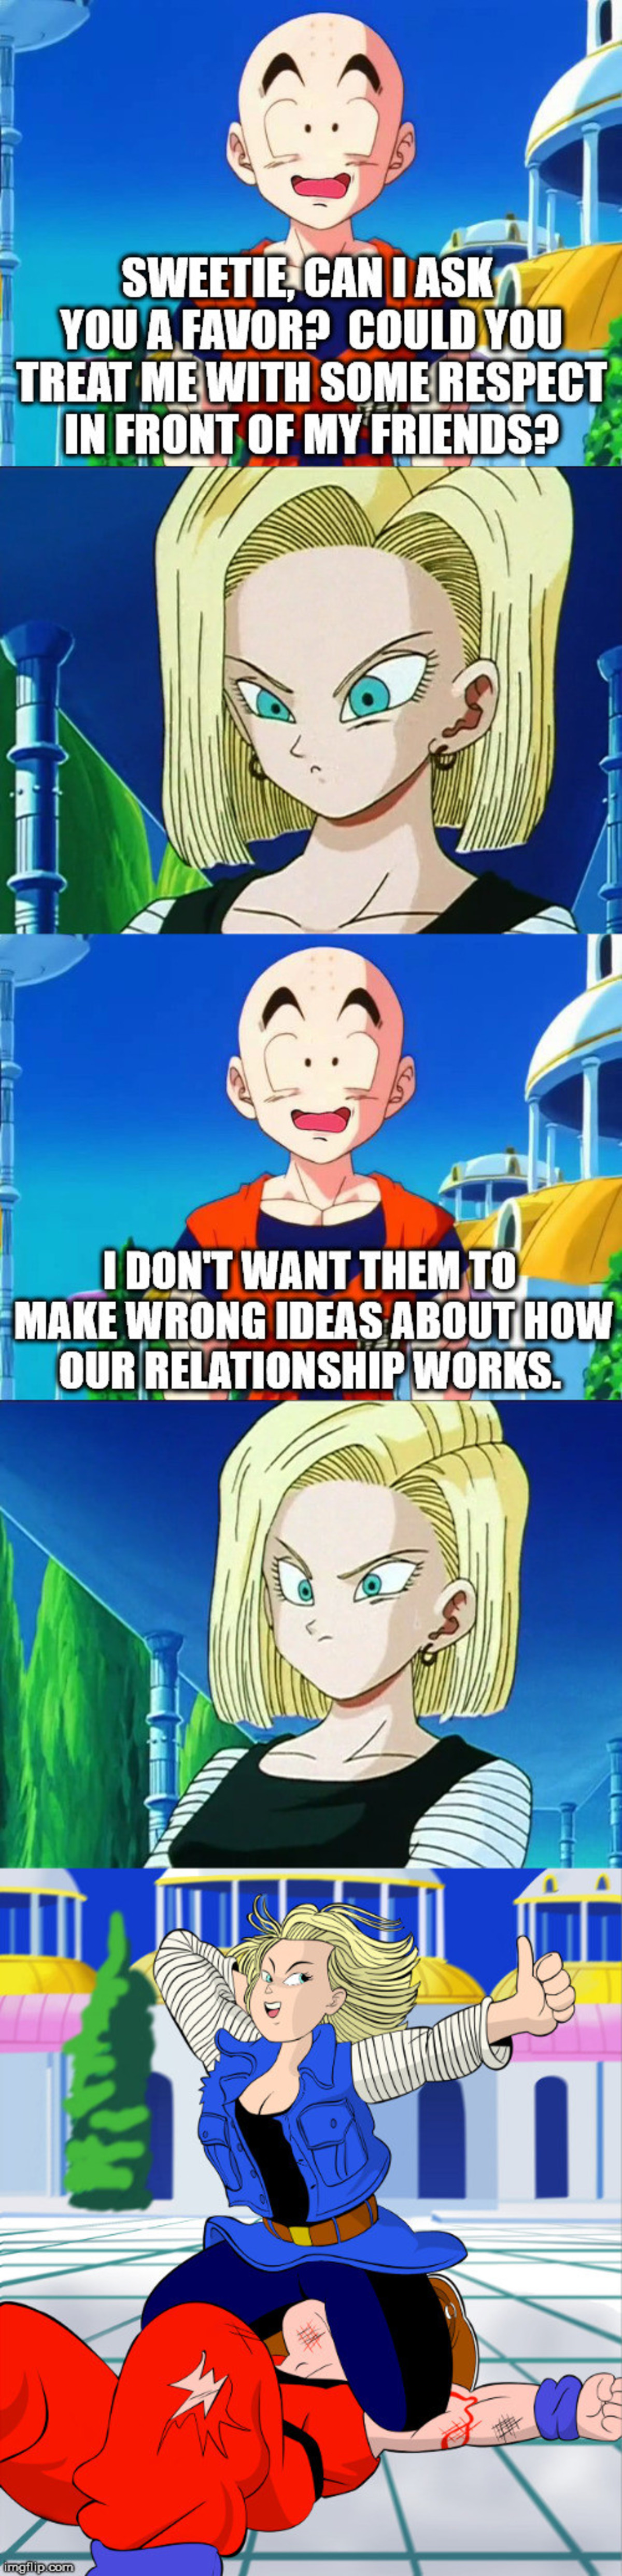 Krillin and C-18: saving the appearances